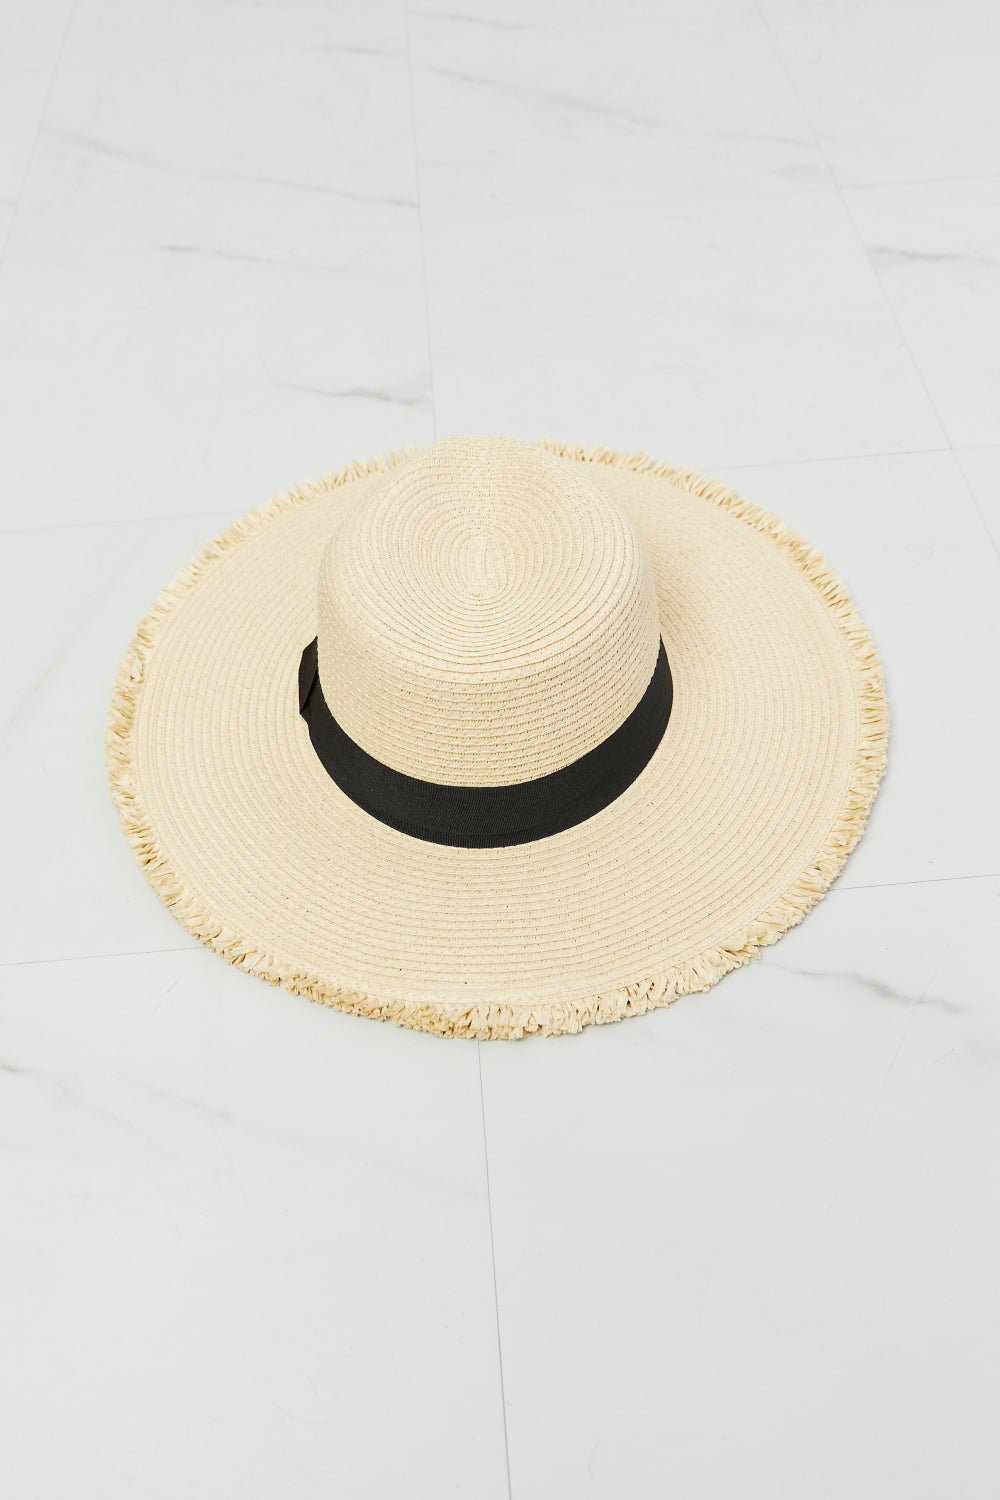 Fame Time For The Sun Straw Hat - Hats - FITGGINS